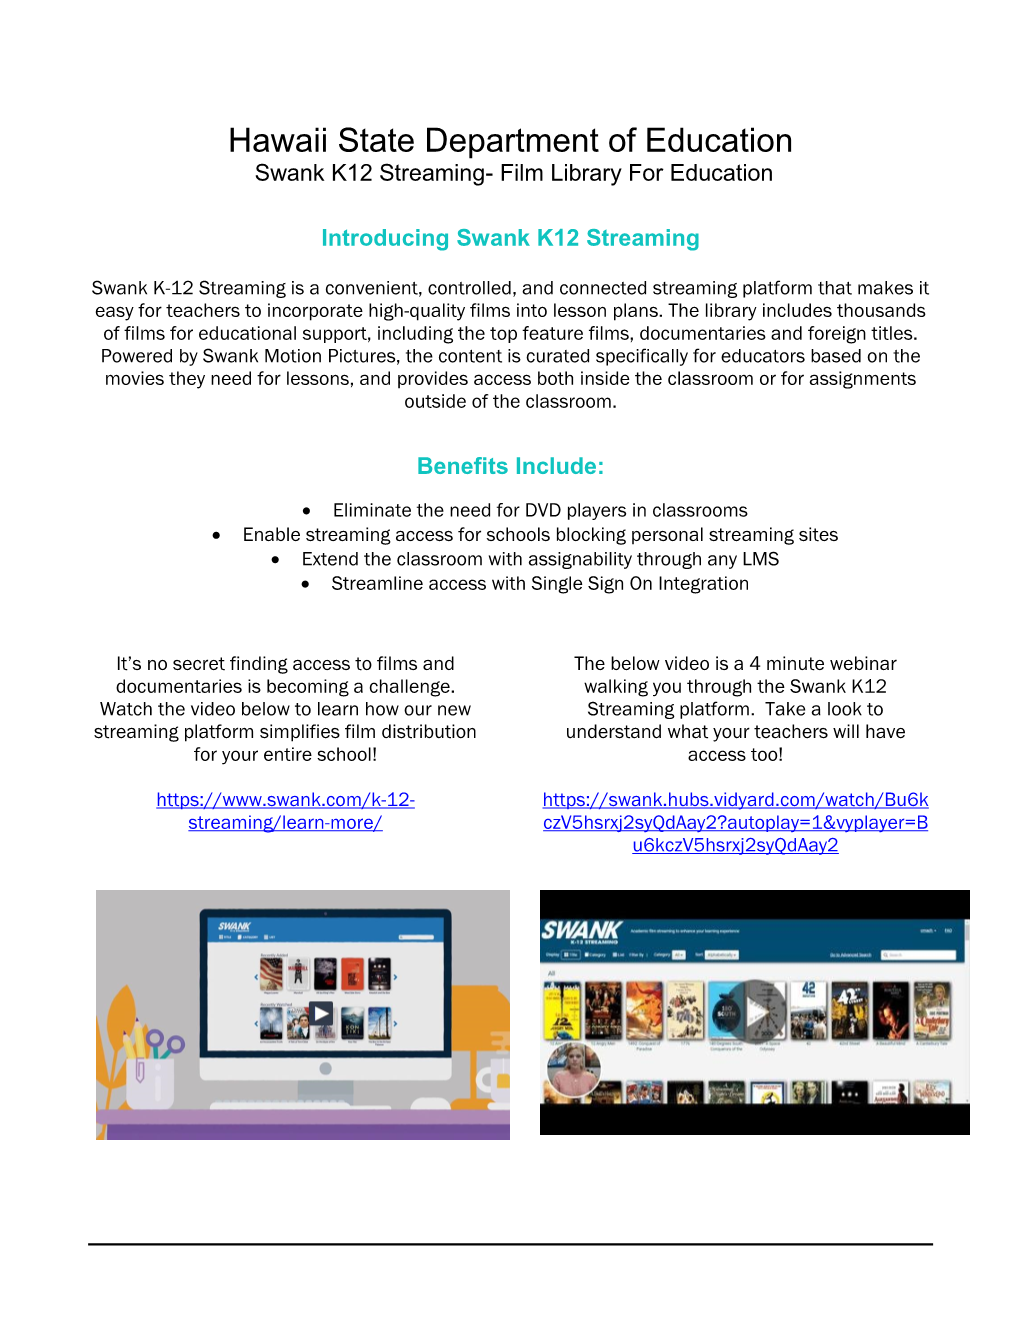 Hawaii State Department of Education Swank K12 Streaming- Film Library for Education